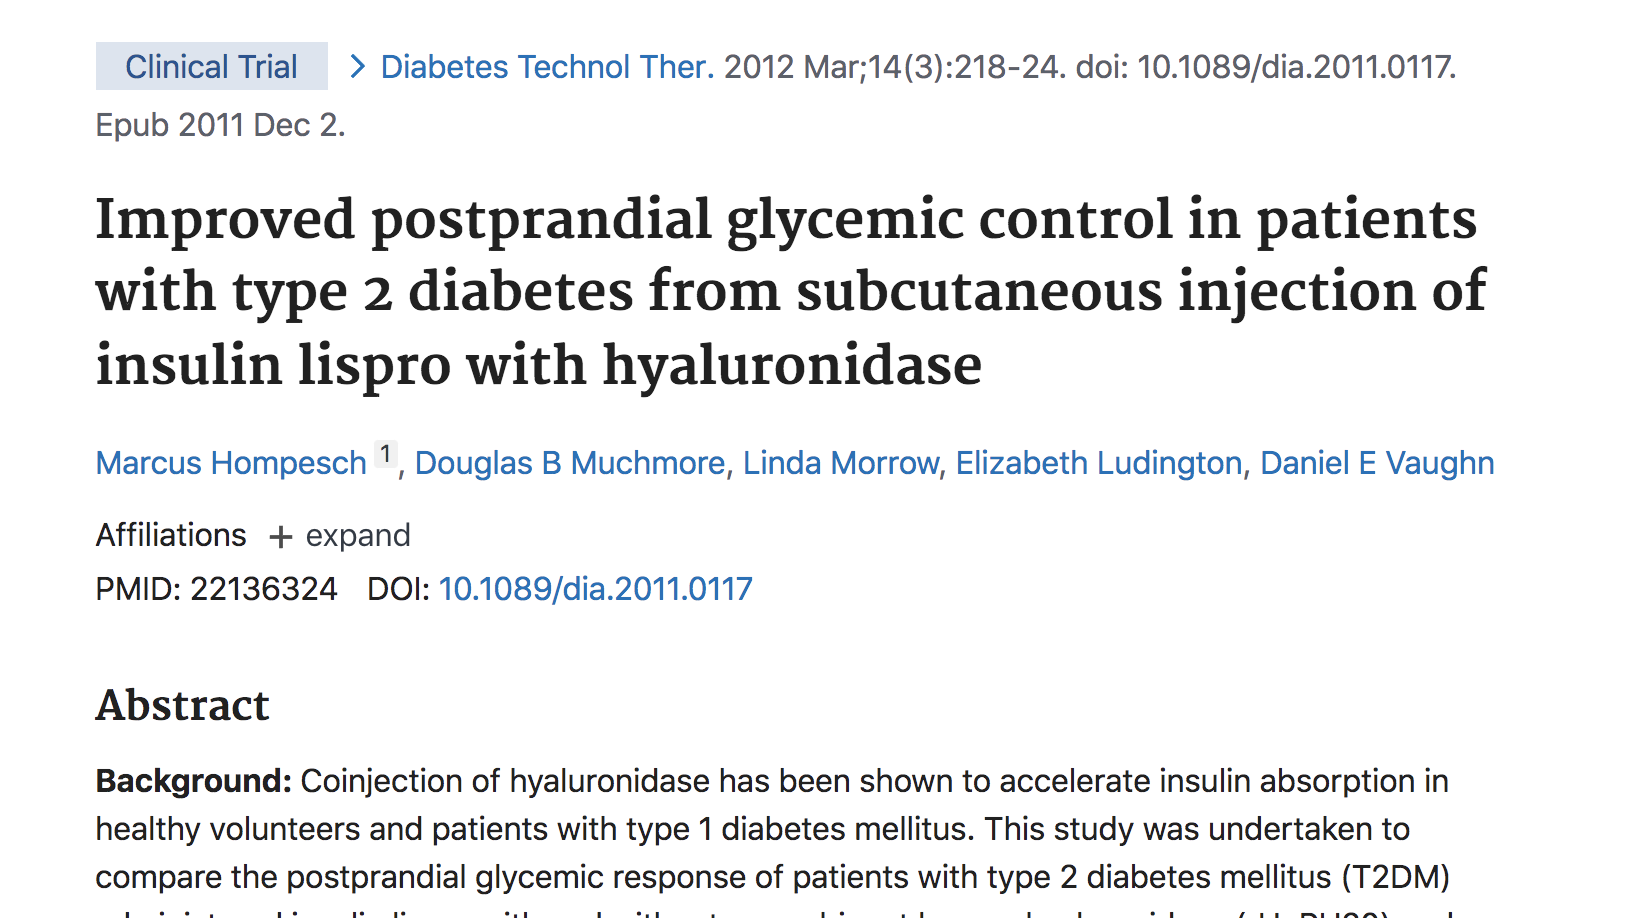 image of Improved postprandial glycemic control in patients with type 2 diabetes from subcutaneous injection of insulin lispro with hyaluronidase